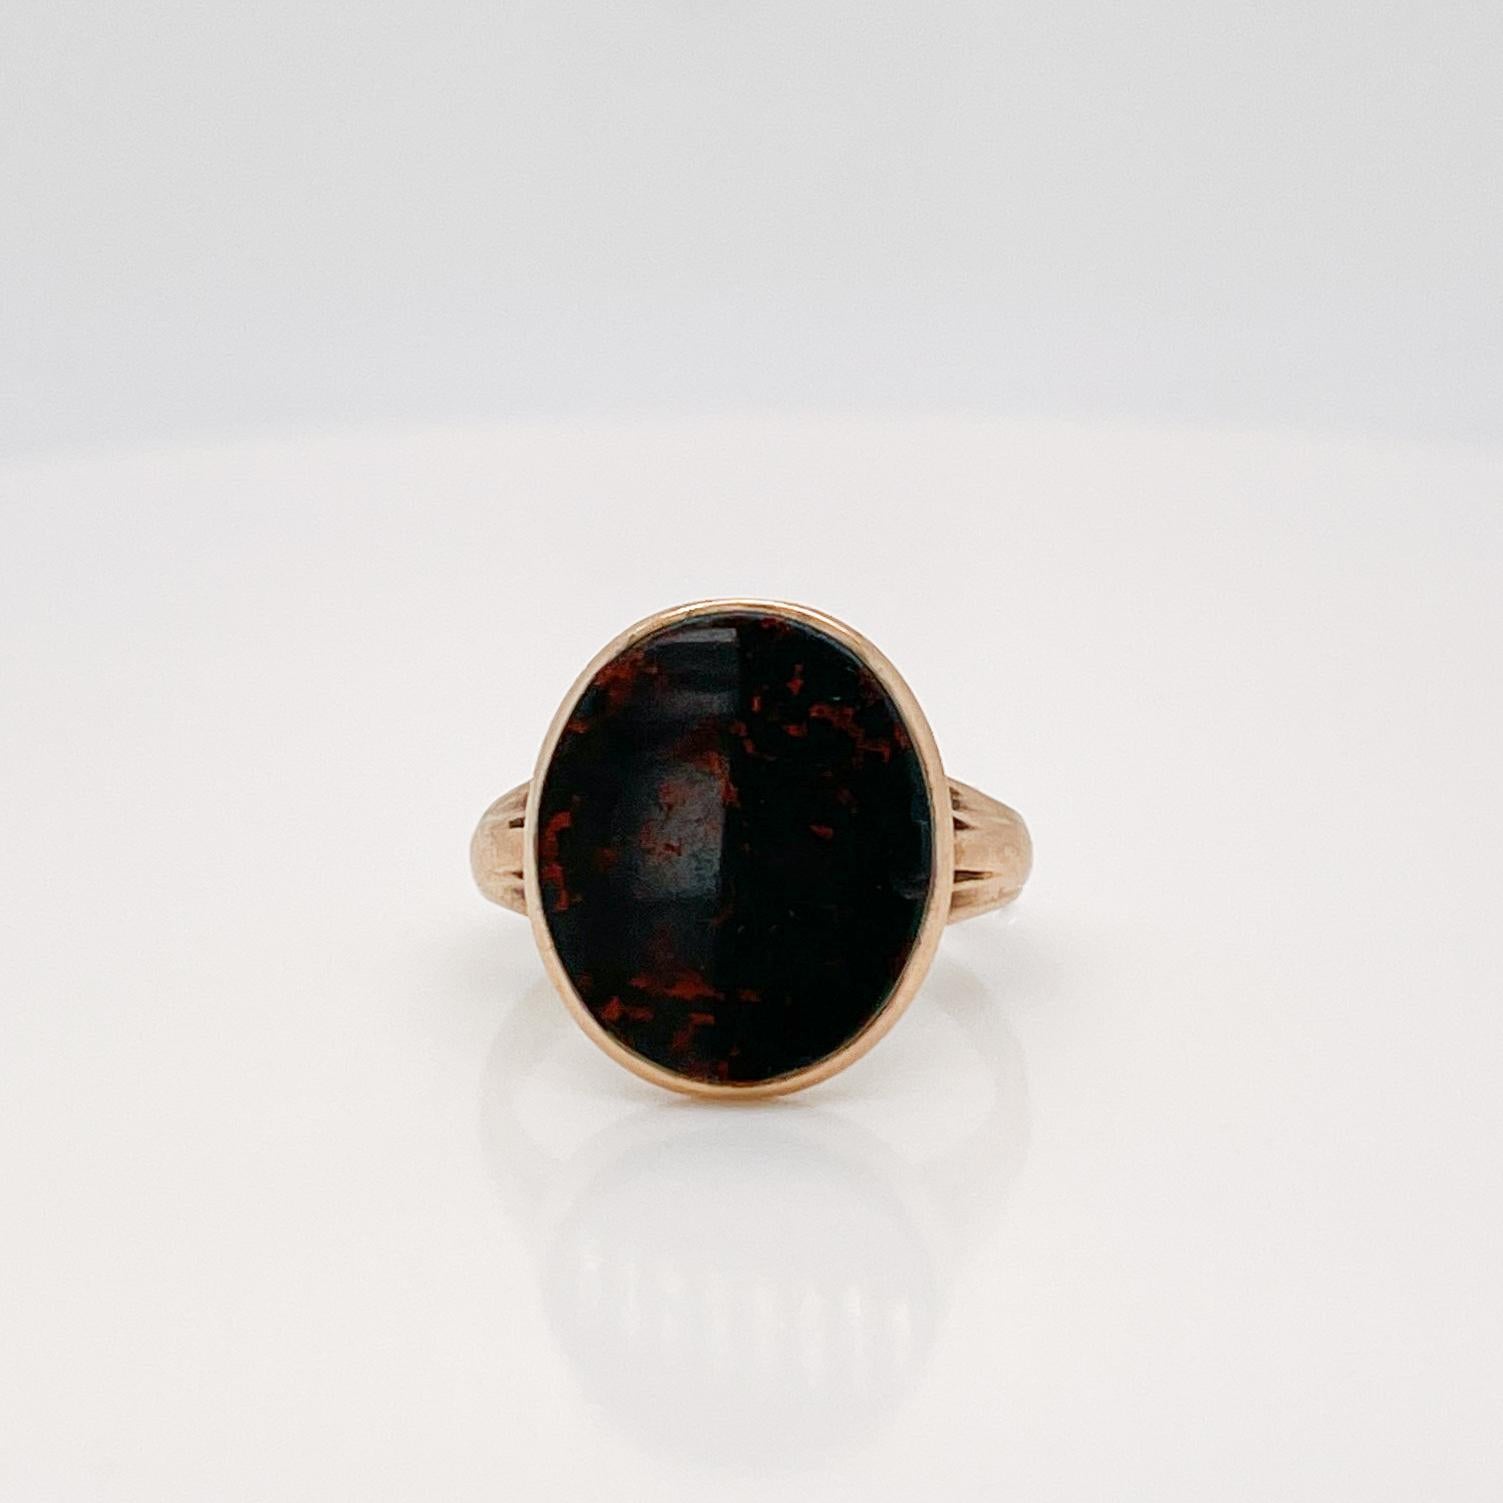 A very fine antique Edwardian 14k gold and bloodstone ring.

With a smooth oval bloodstone bezel set in 14k gold signet style setting.

Made by George Street & Sons Jewelry Co. of New York, New York.

Simply a wonderful signed ring!

Date:
Late 19th